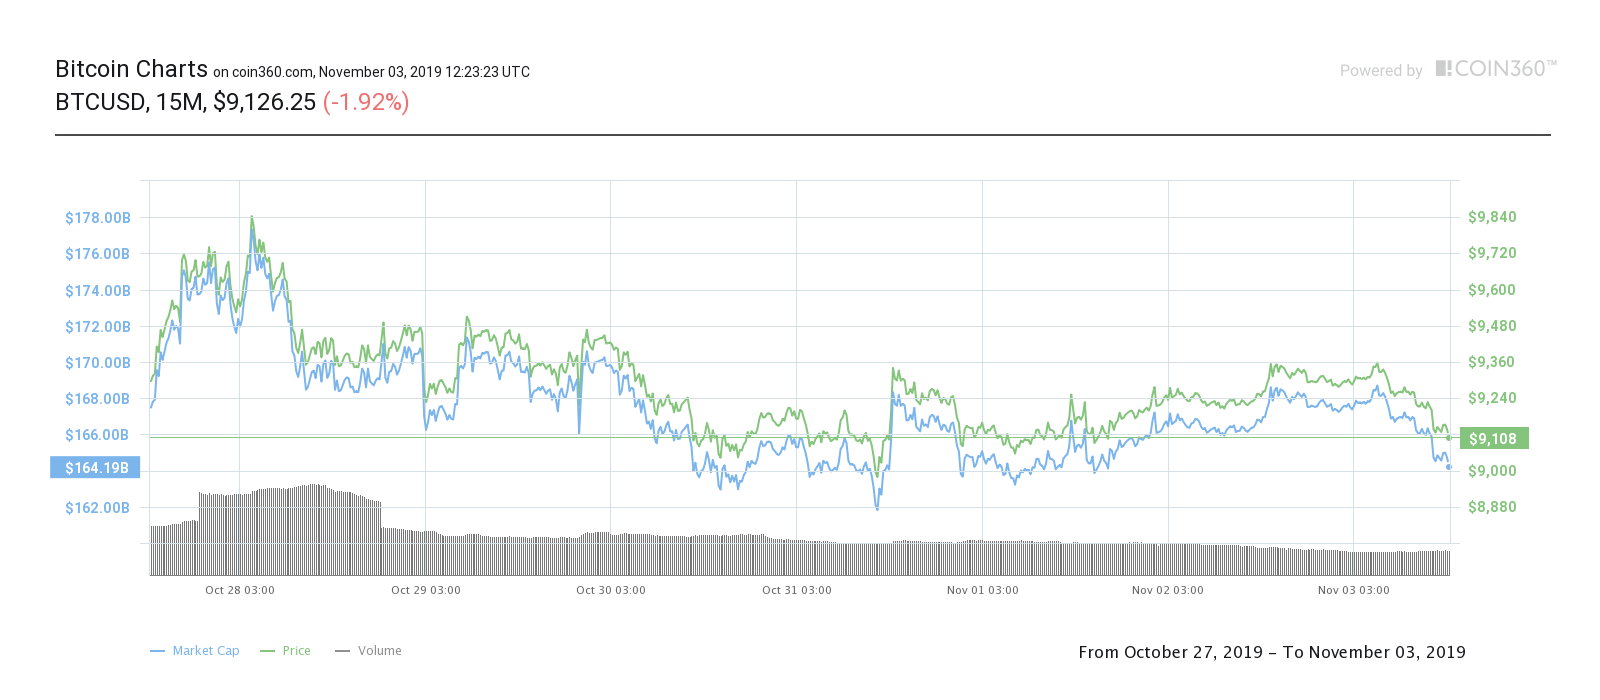 Bitcoin seven-day price chart. Source: Coin360